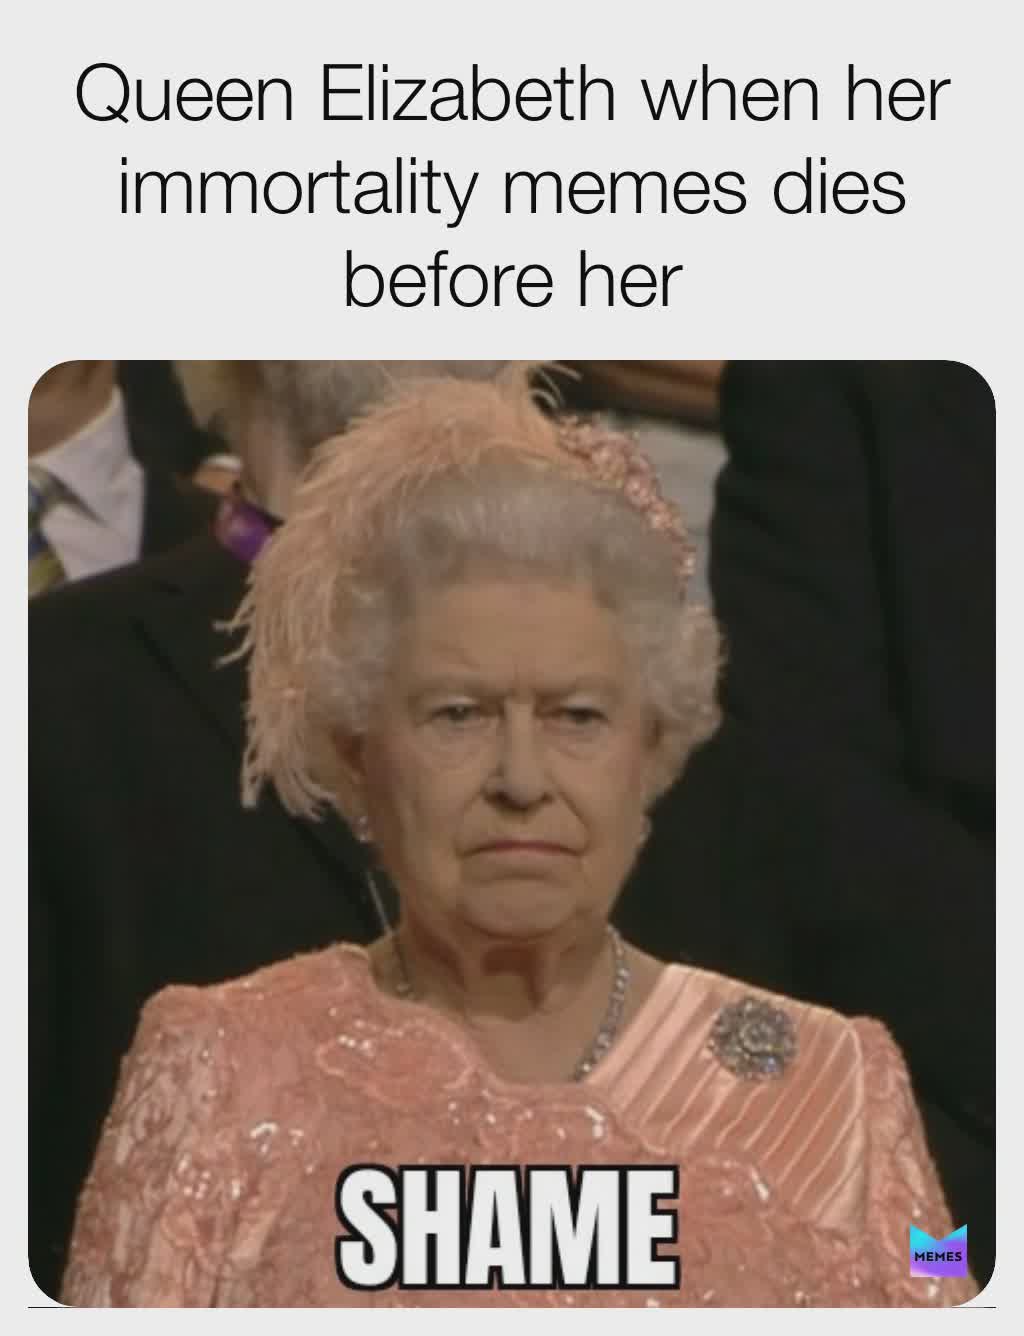 Funny, Queen, Shame, Prince Phillip, John Noble other memes Funny, Queen, Shame, Prince Phillip, John Noble text: Queen Elizabeth when her immortality memes dies before her SHAME MEMES 